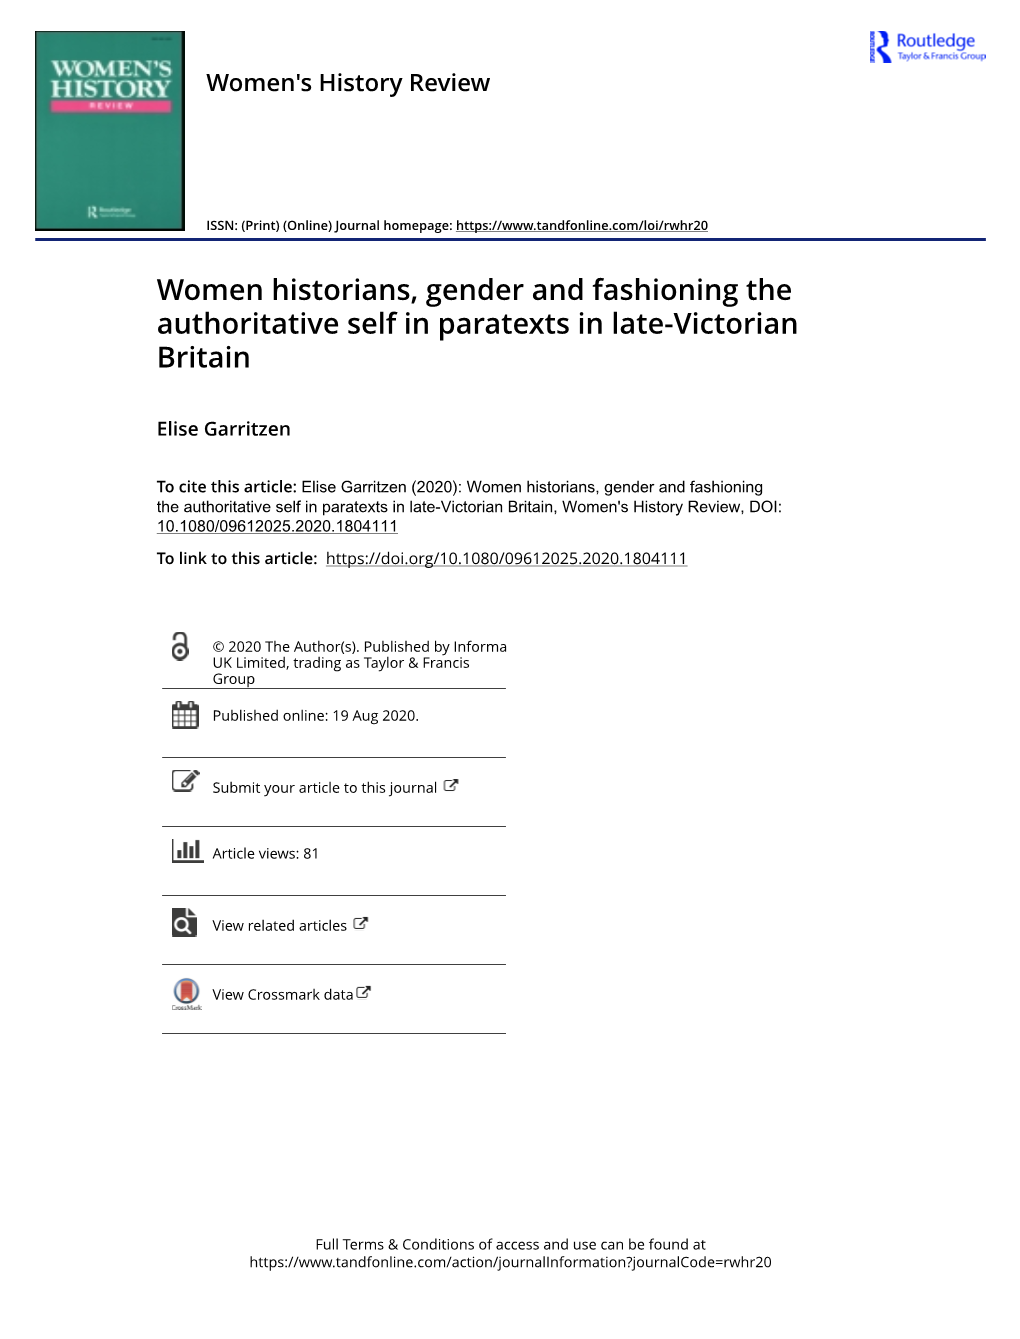 Women Historians, Gender and Fashioning the Authoritative Self in Paratexts in Late-Victorian Britain